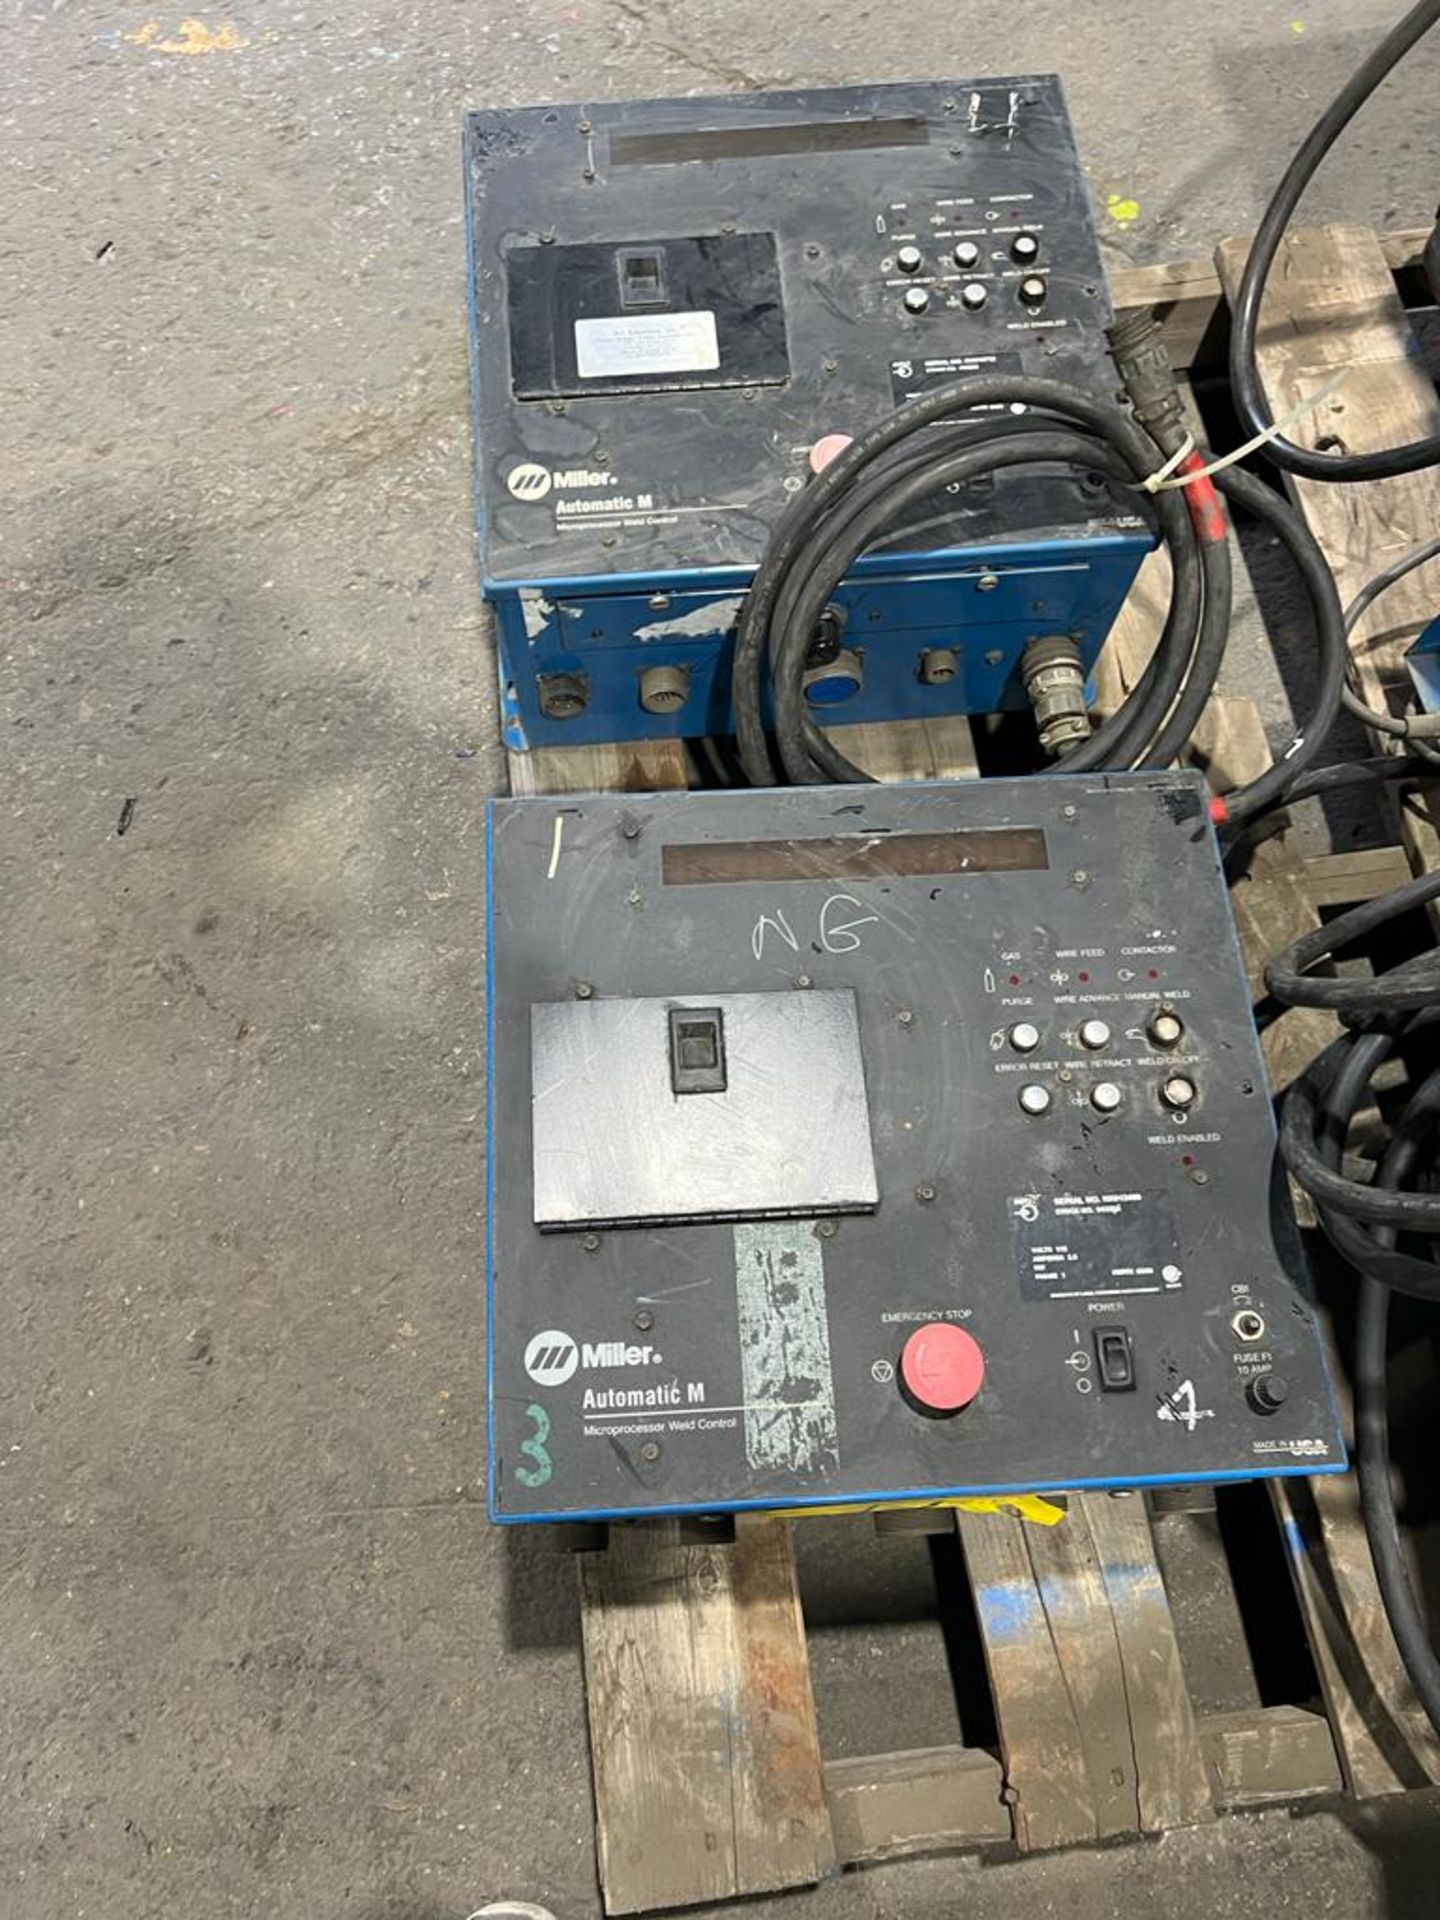 Lot of 5 Miller Welder Control Units Miller - High Frequency Arc Starter, Automatic M units,